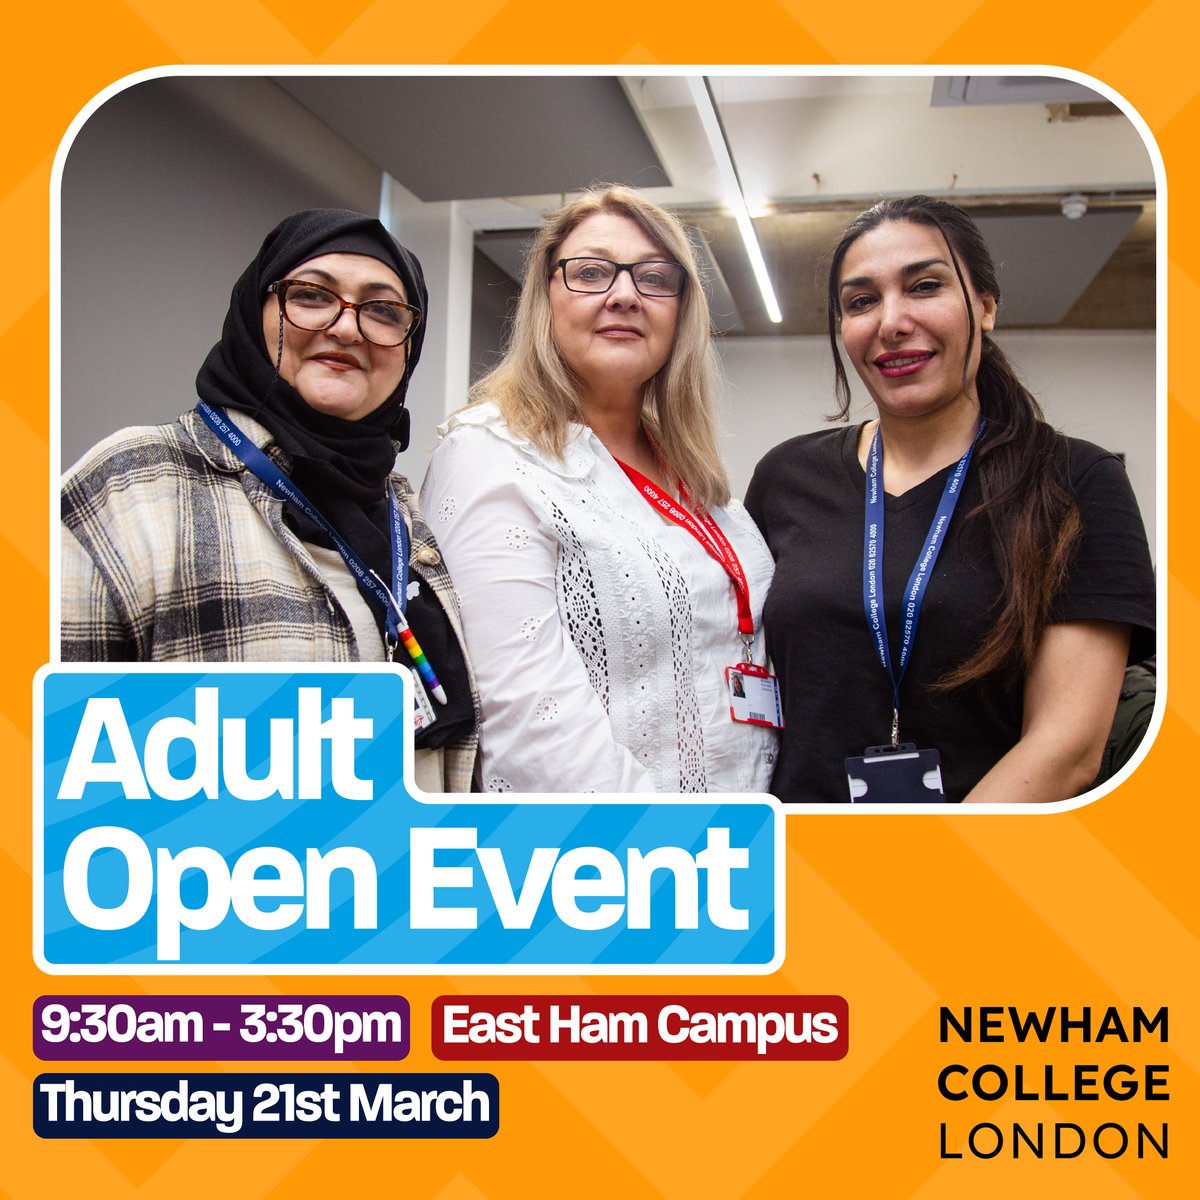 Adult Open Day this Thursday! If you are 19+, join us at our adult open event and discover the diverse range of courses and programs available to adult learners at Newham College! Sign up to one of our sessions here - newham.ac.uk/open-events-at…